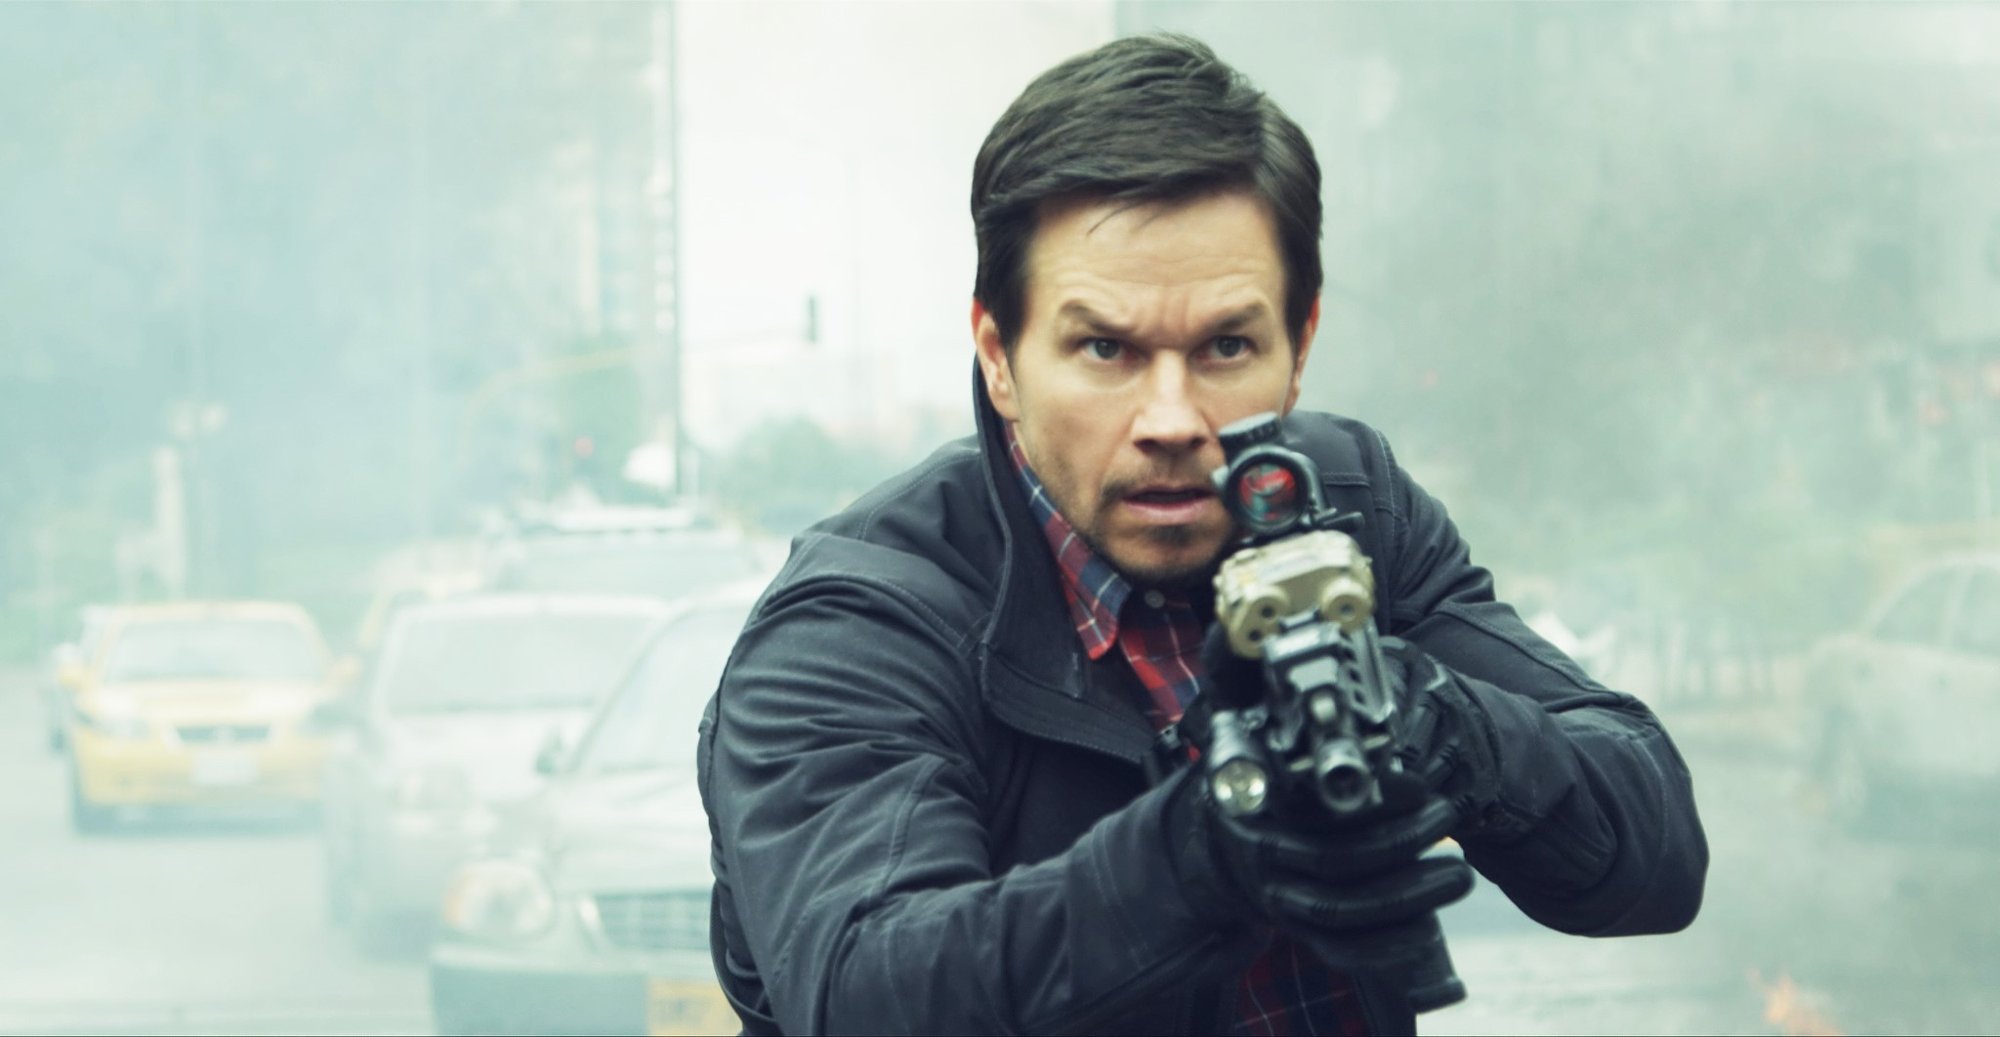 Mark Wahlberg in STX Entertainment's Mile 22 (2018)